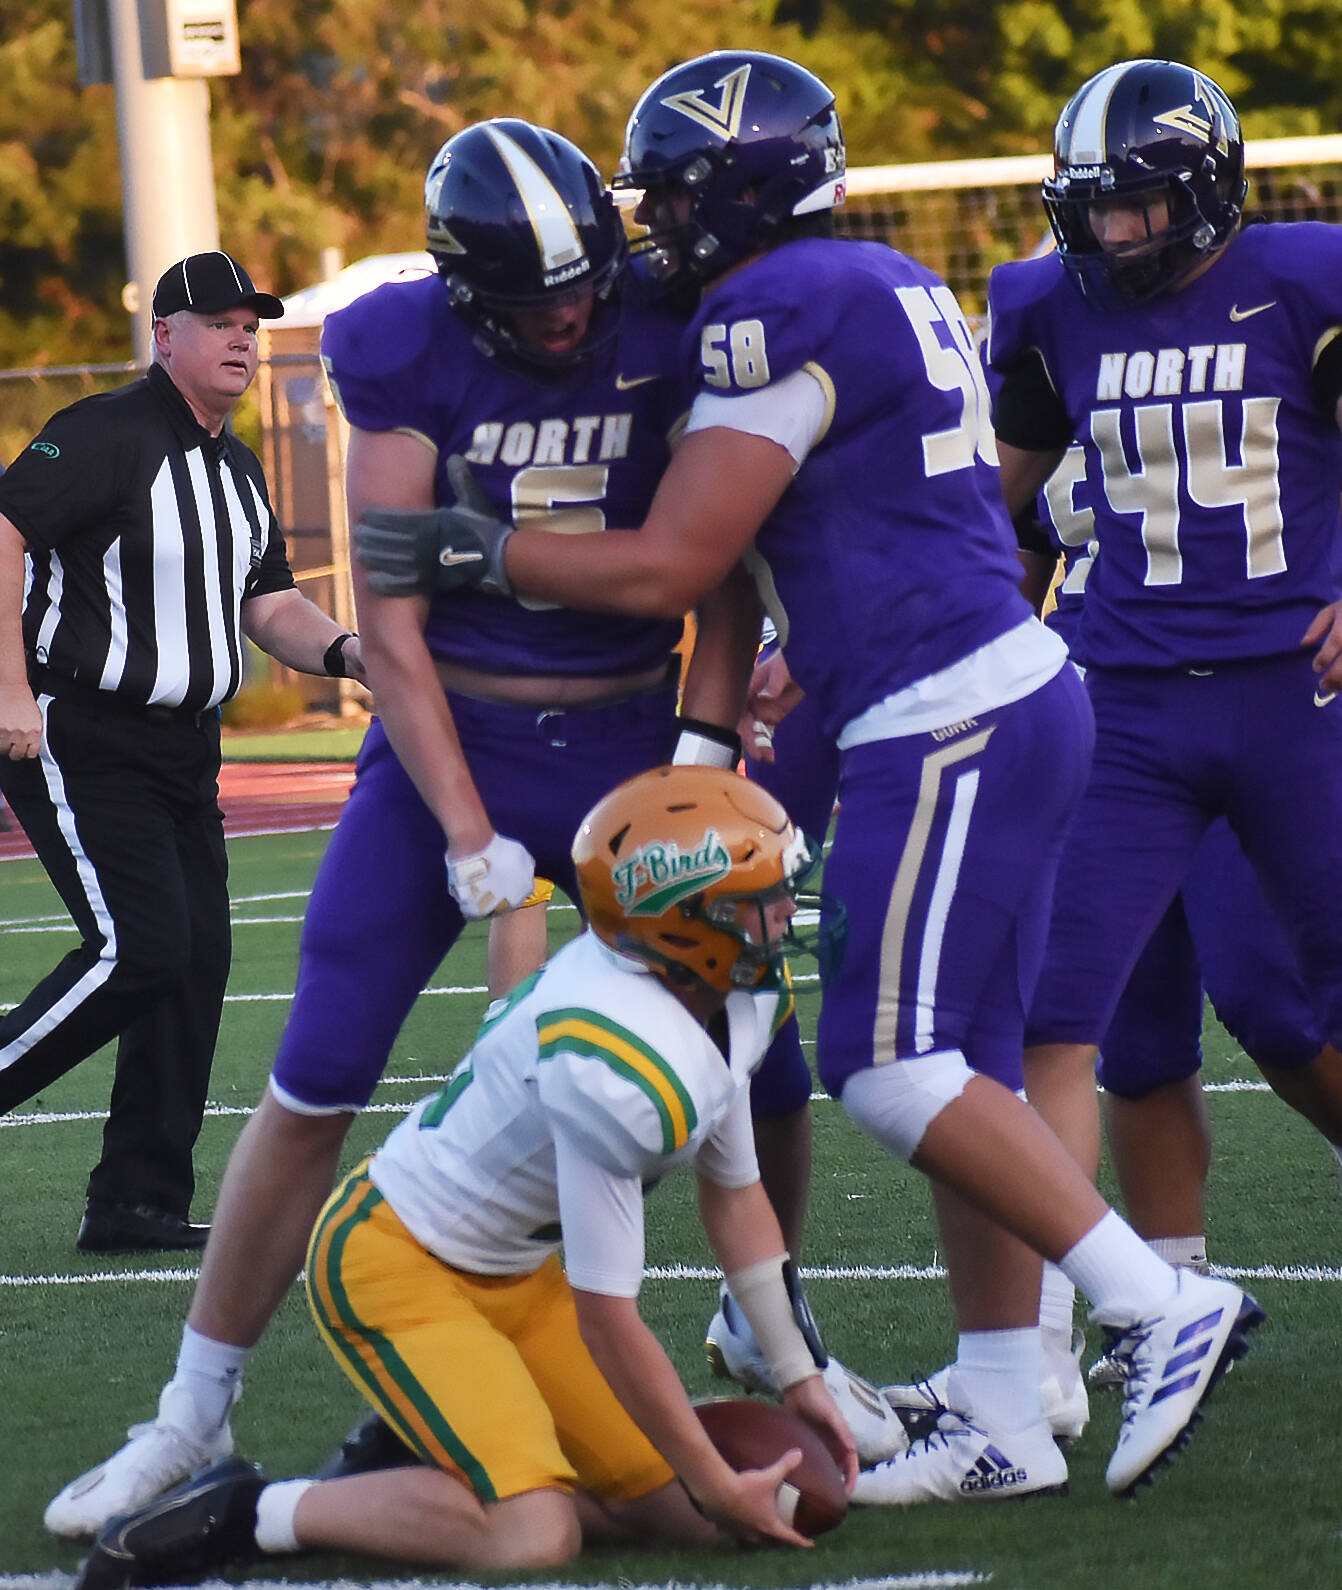 North Kitsap loses its first home game since Steilacoom in 2019.